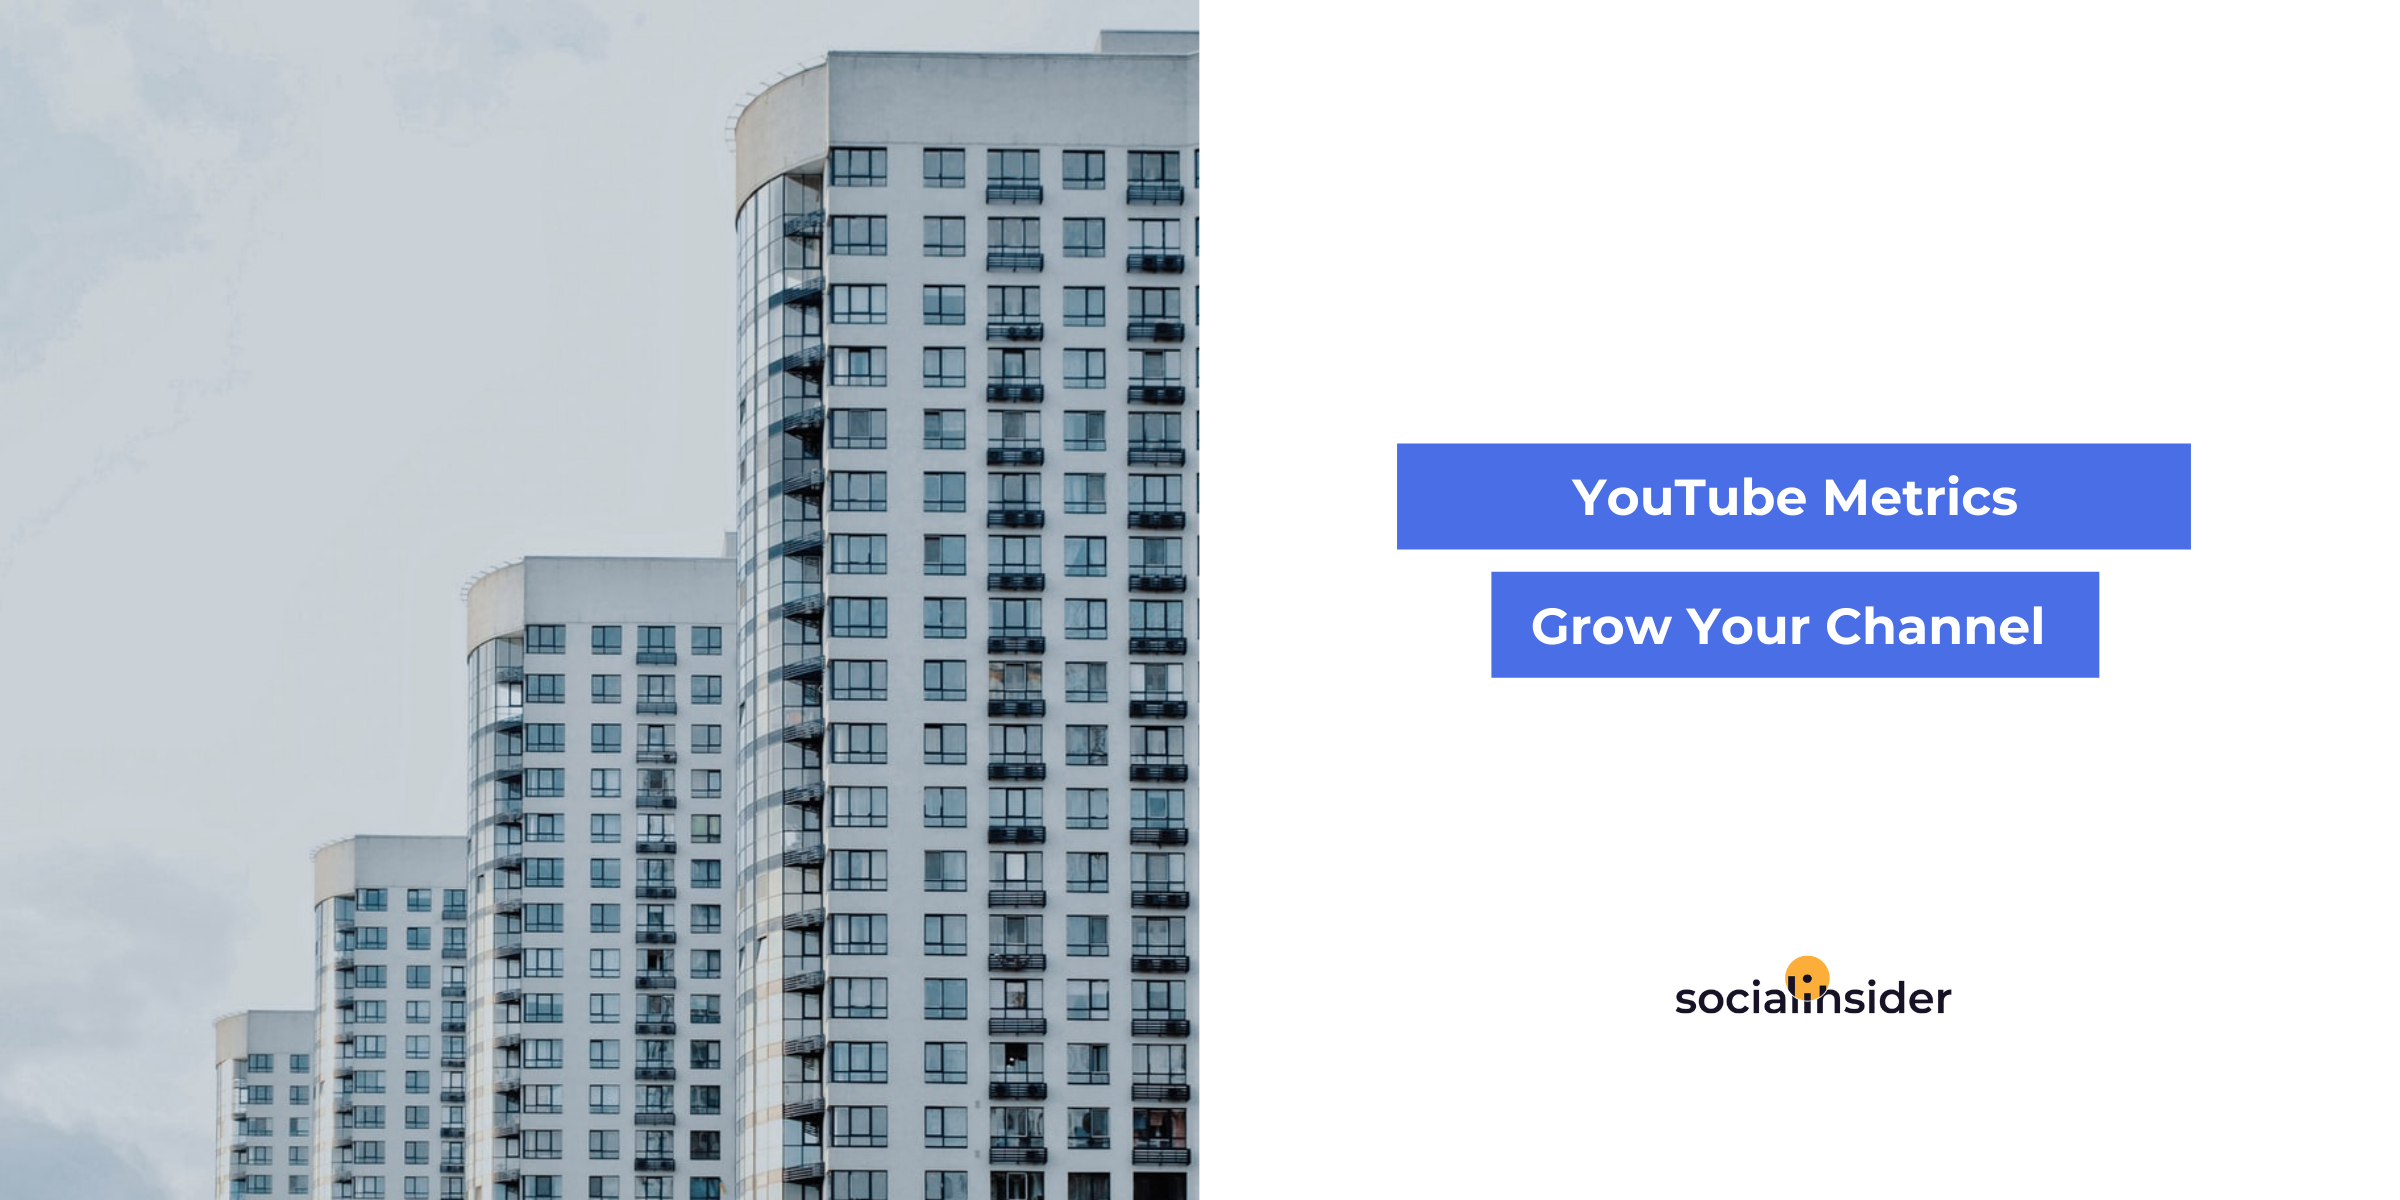 YouTube Metrics: Use Data to Grow Your Channel Faster